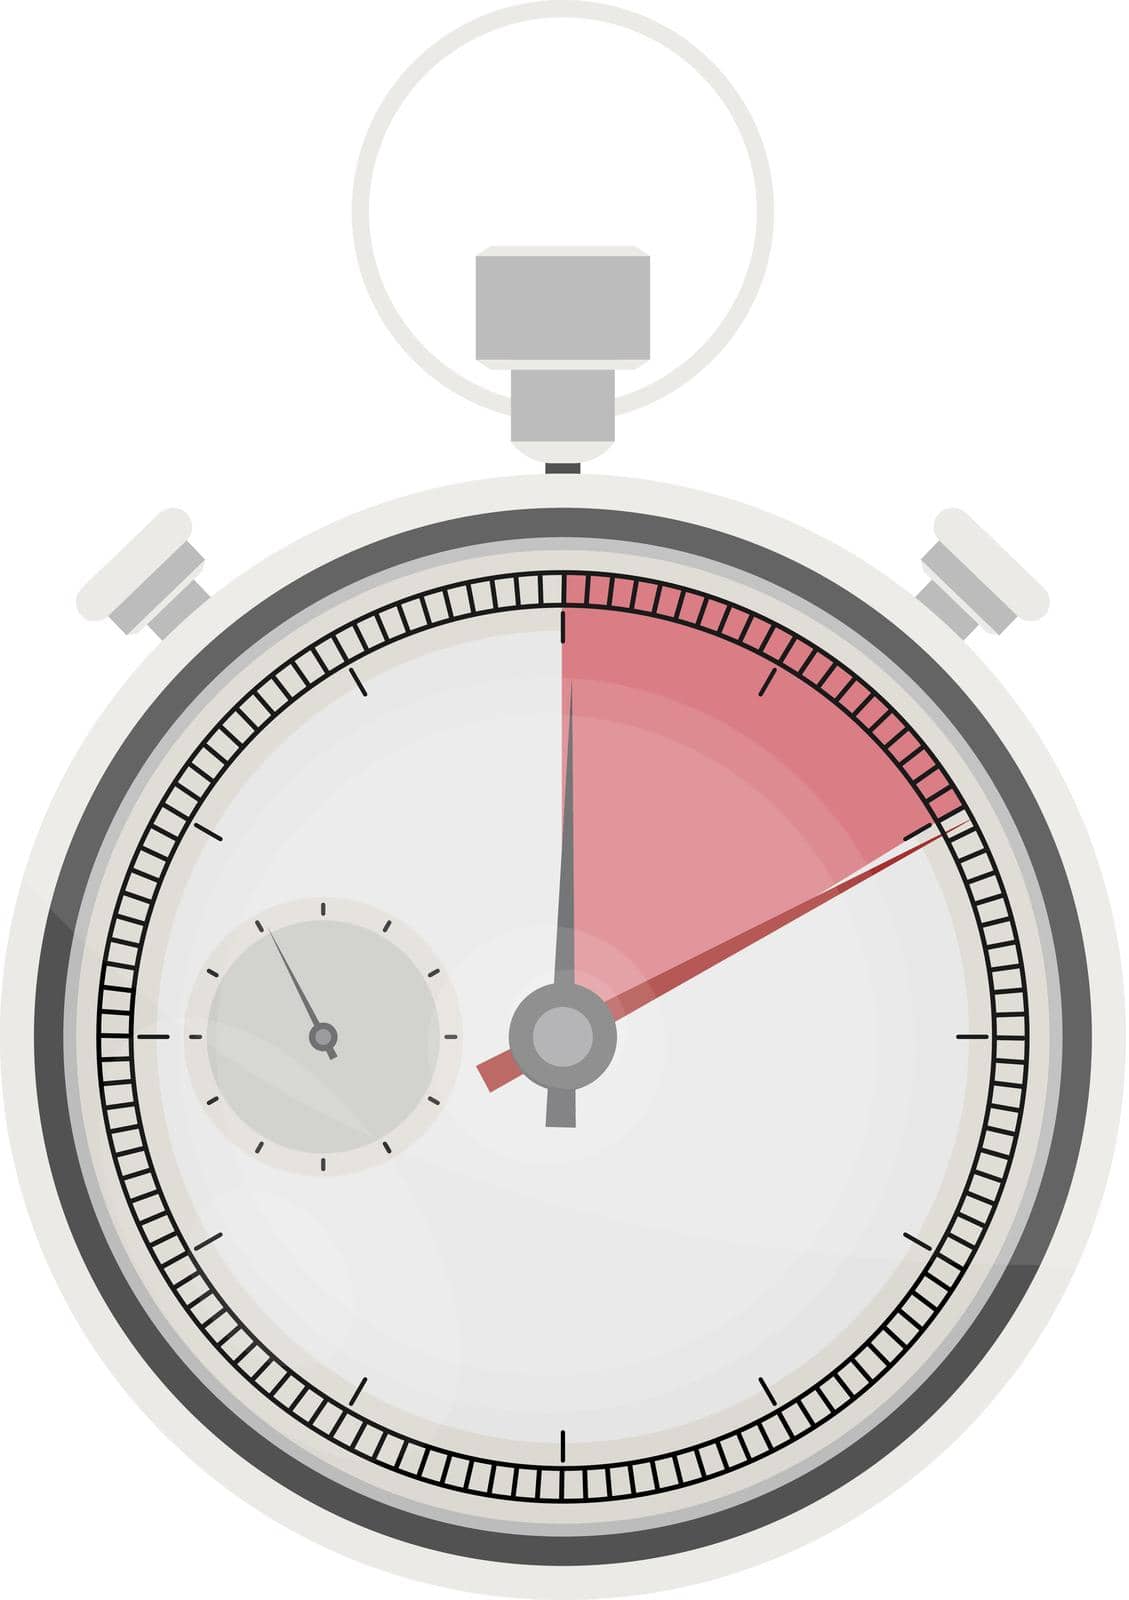 Highlighted five seconds on stopwatch. Vector five minute clock, number chronometer, quick measurement, precision timepiece illustration by Javvani